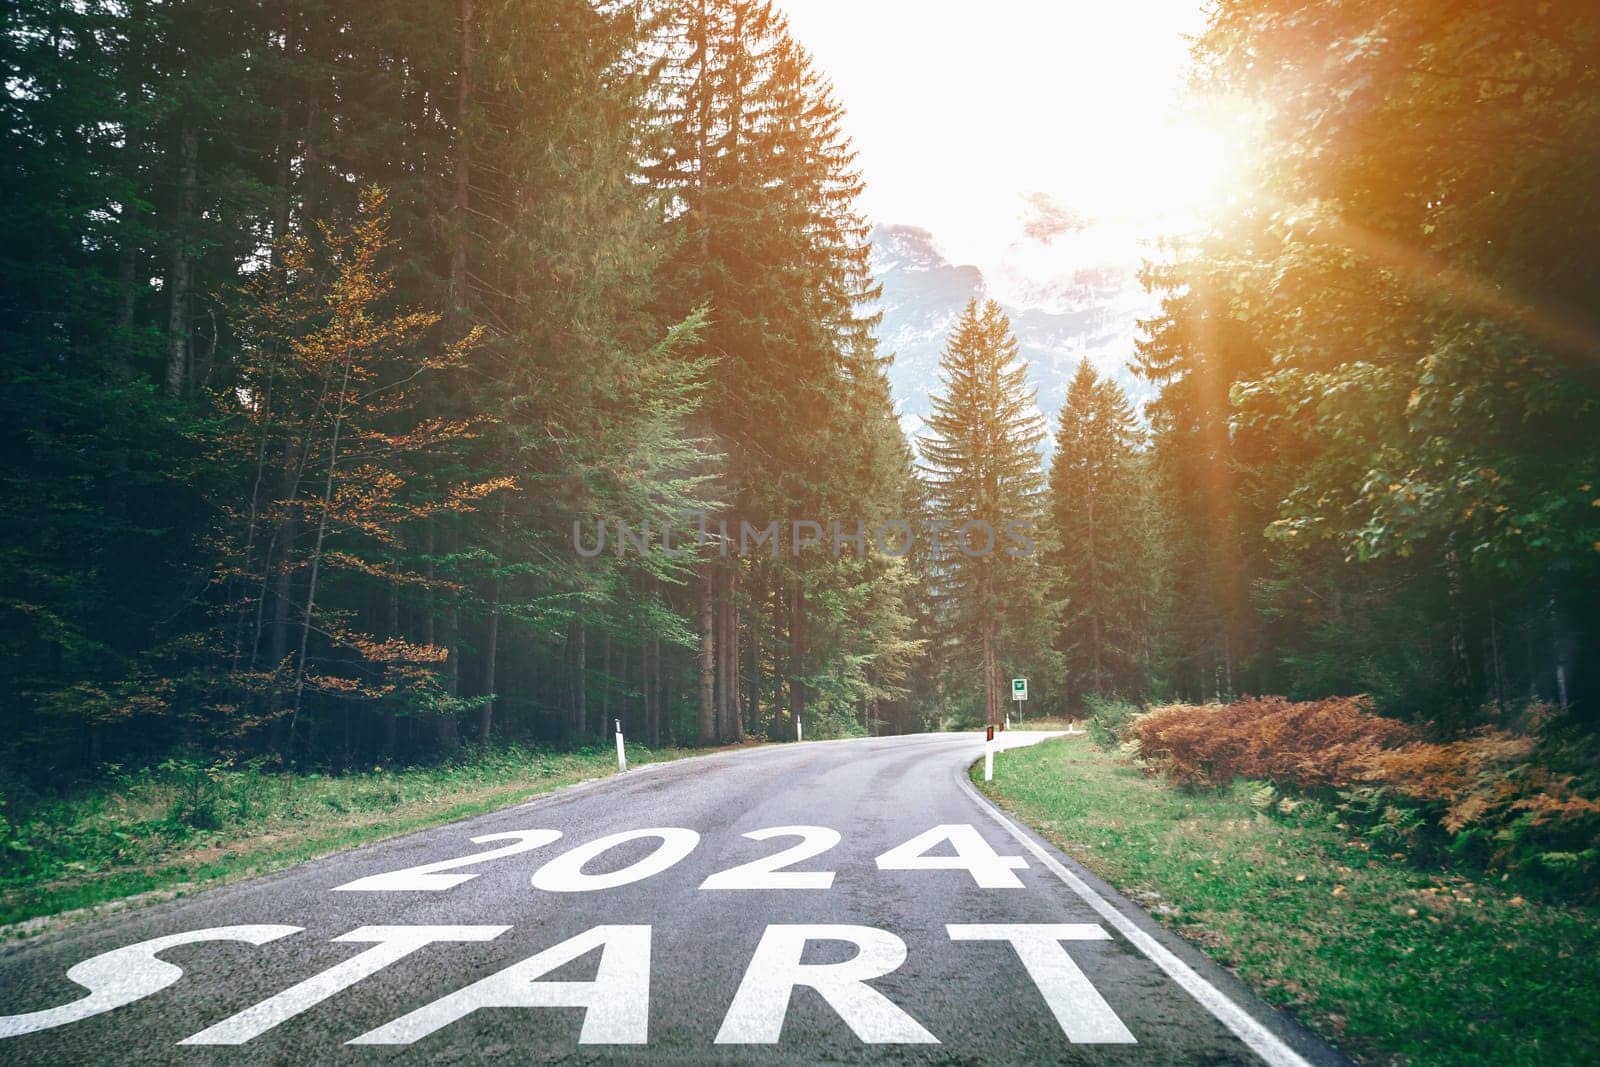 2024 New Year road trip travel and future vision concept . Nature landscape with highway road leading forward to happy new year celebration in the beginning of 2024 for bliss and successful start .